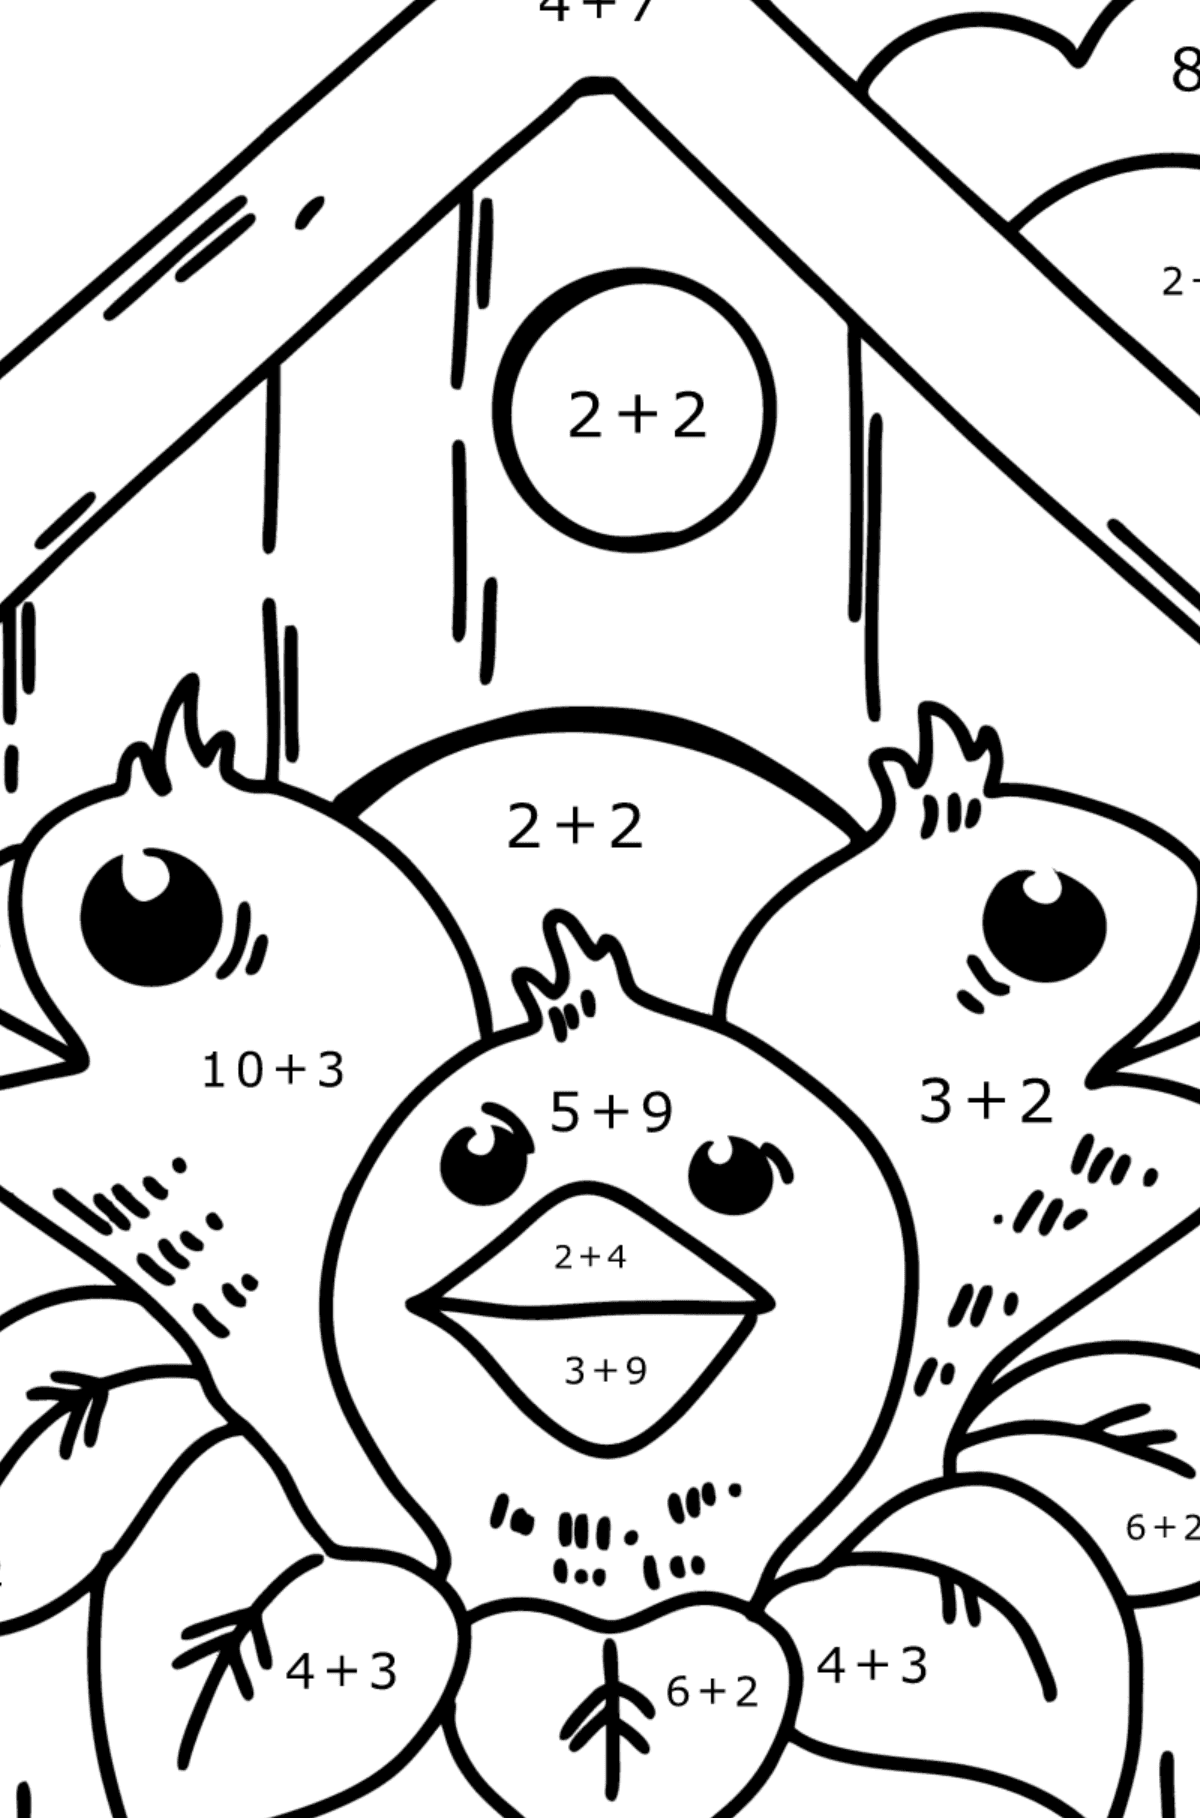 Chicks in a Birdhouse coloring page - Math Coloring - Addition for Kids